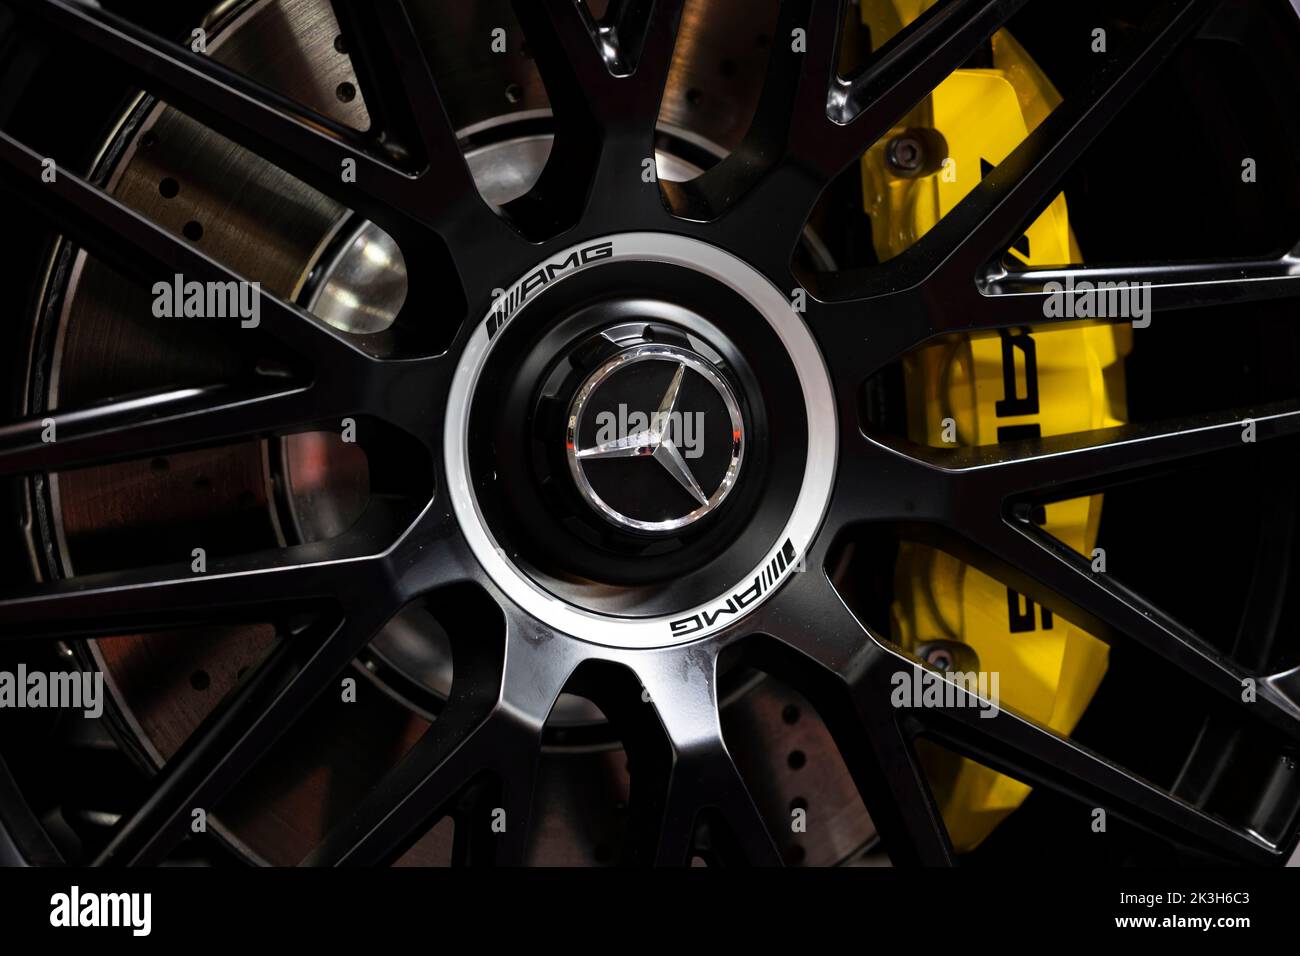 Sofia, Bulgaria - 3 June, 2022: Close-up of Mercedes-Benz logo is seen on a wheel of a car with ventilated ceramic brakes at Sofia Motor Show. Stock Photo